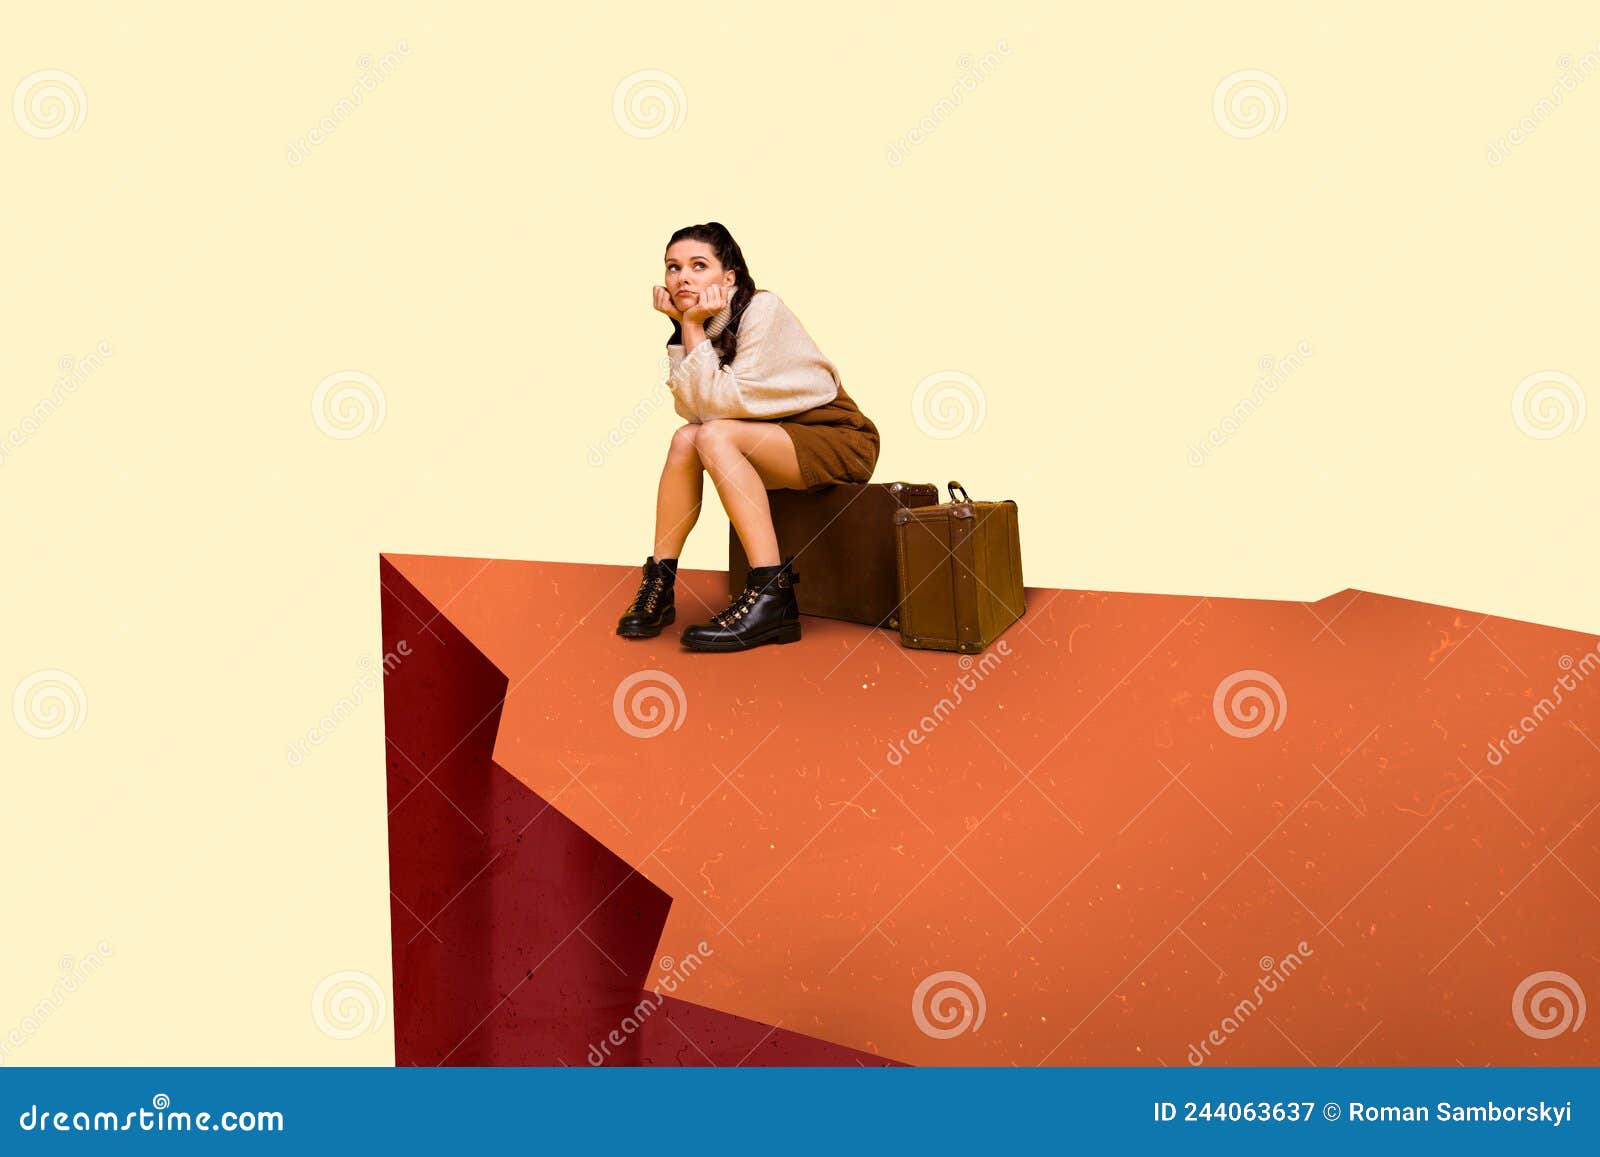 104 Cartoon Lonely Girl Stock Photos - Free & Royalty-Free Stock Photos  from Dreamstime